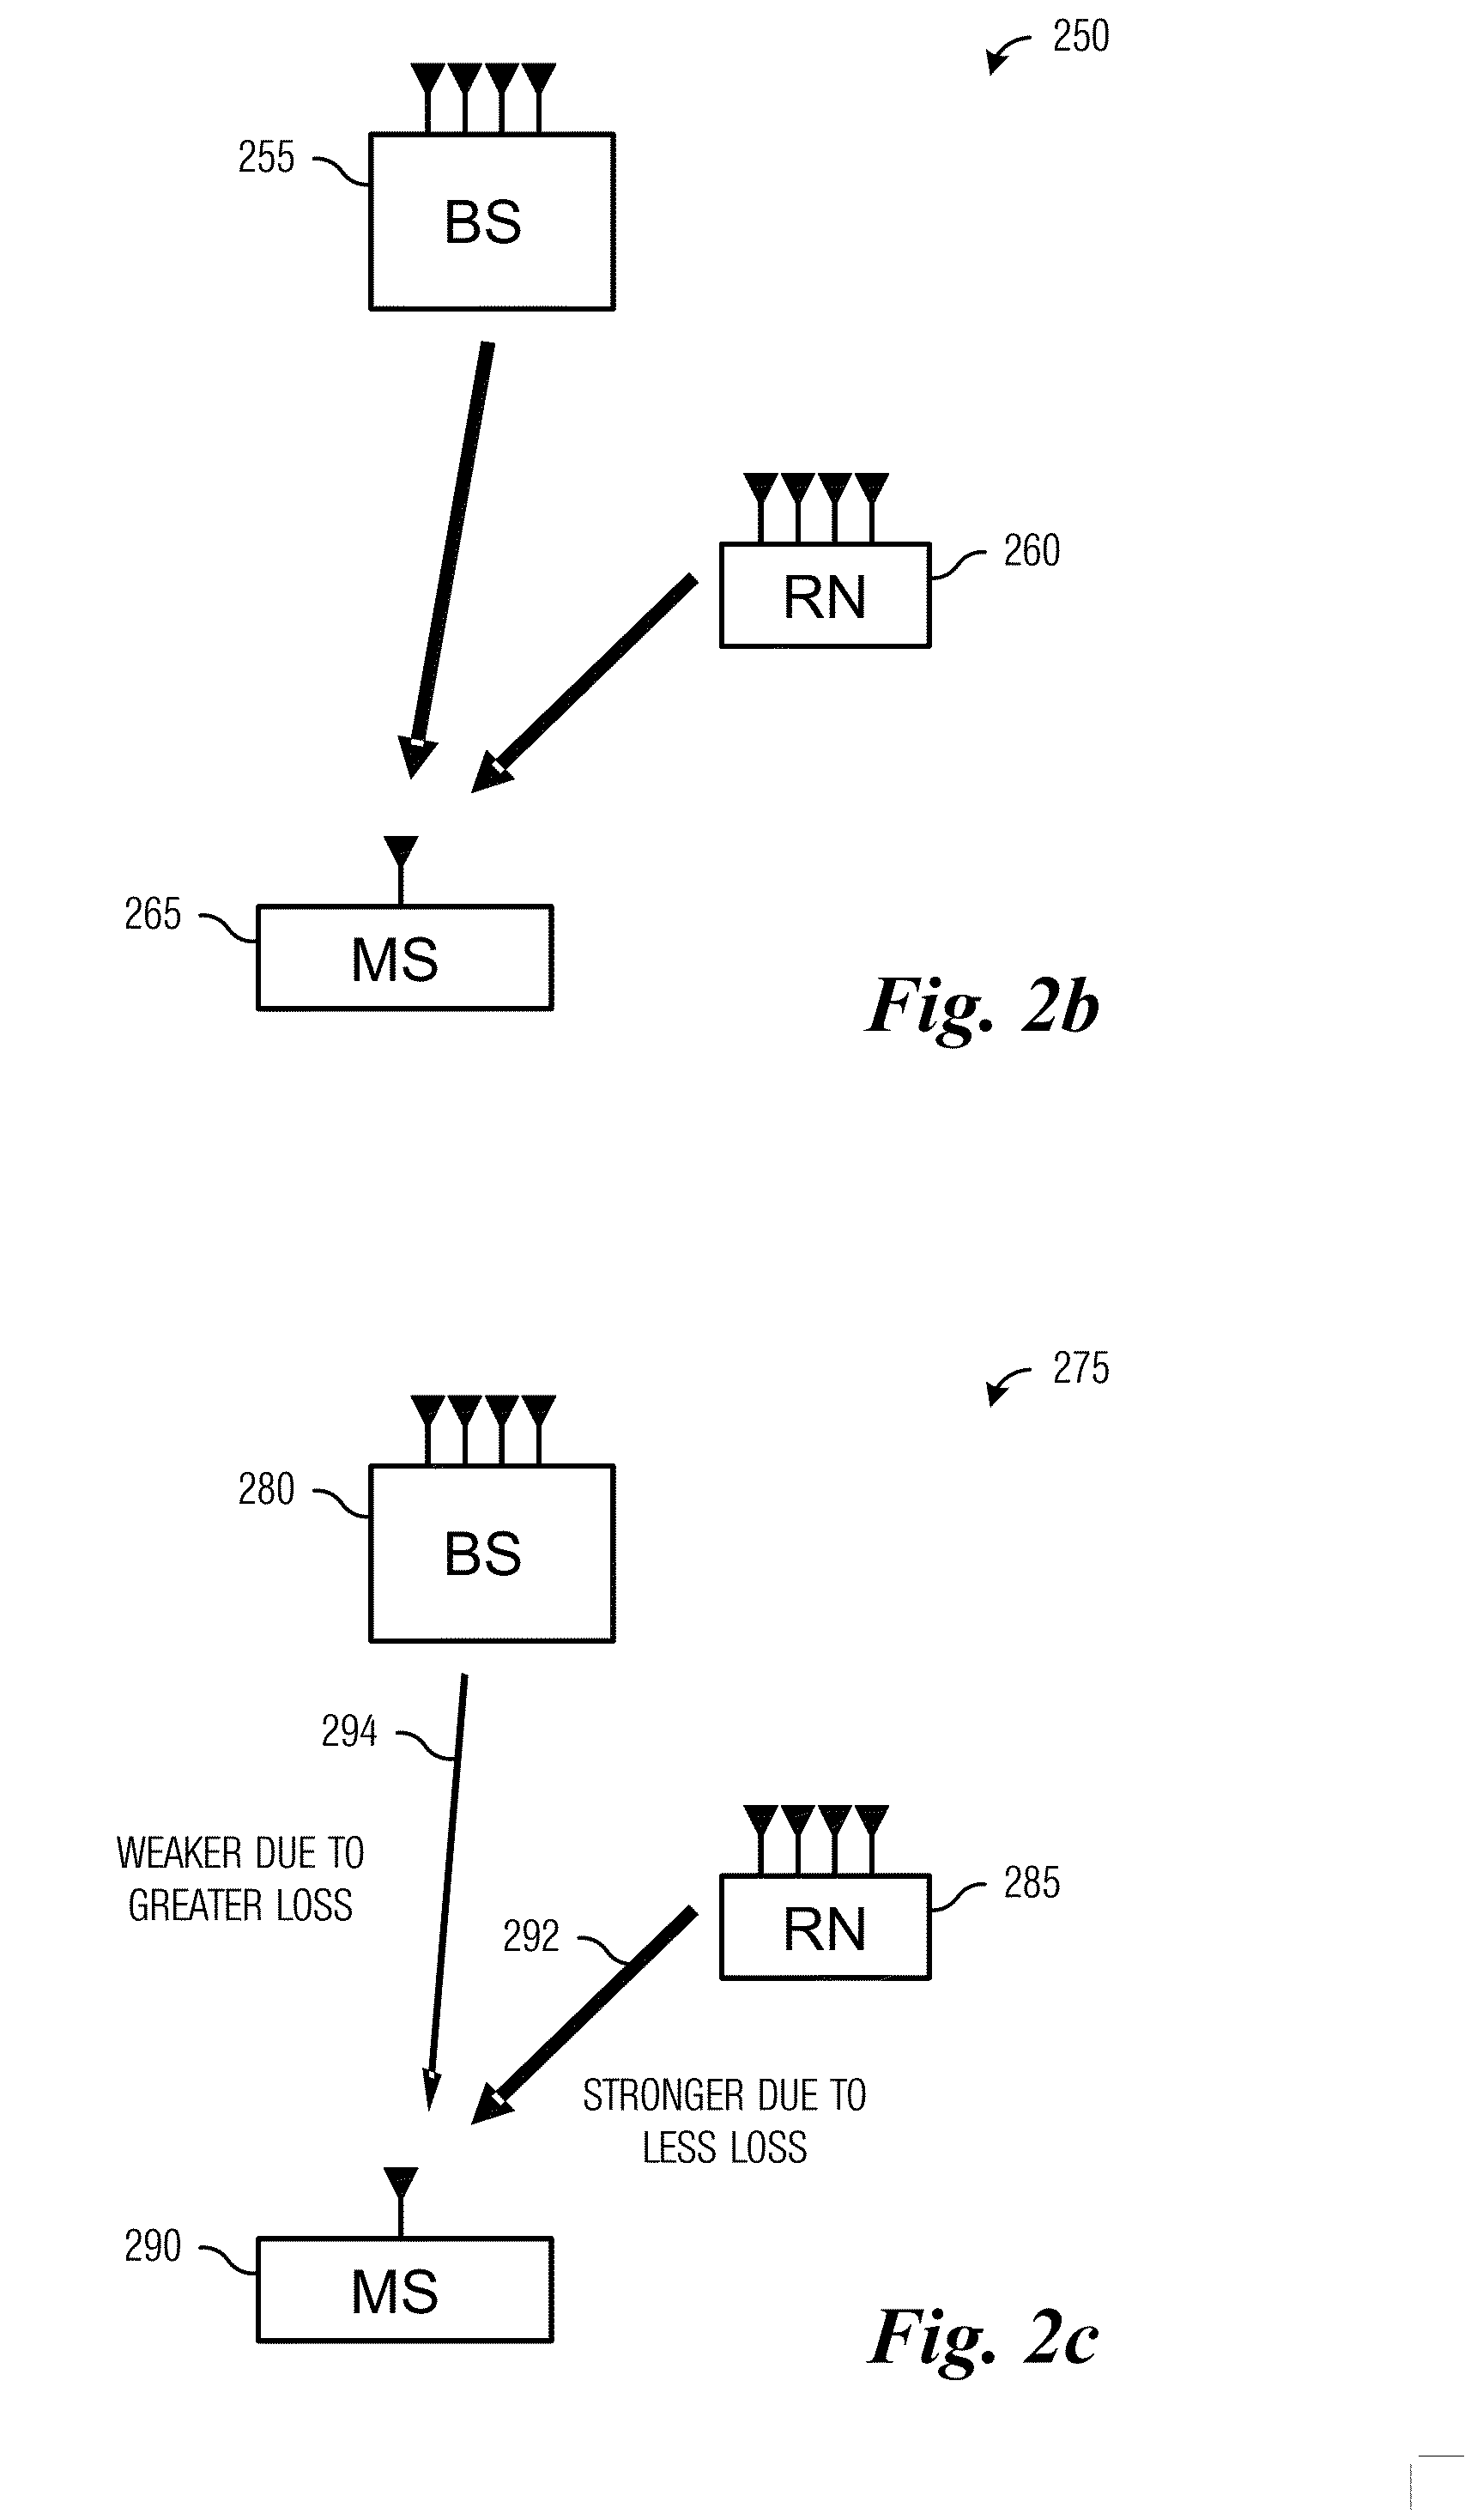 System and Method for Non-Uniform Bit Allocation in the Quantization of Channel State Vectors